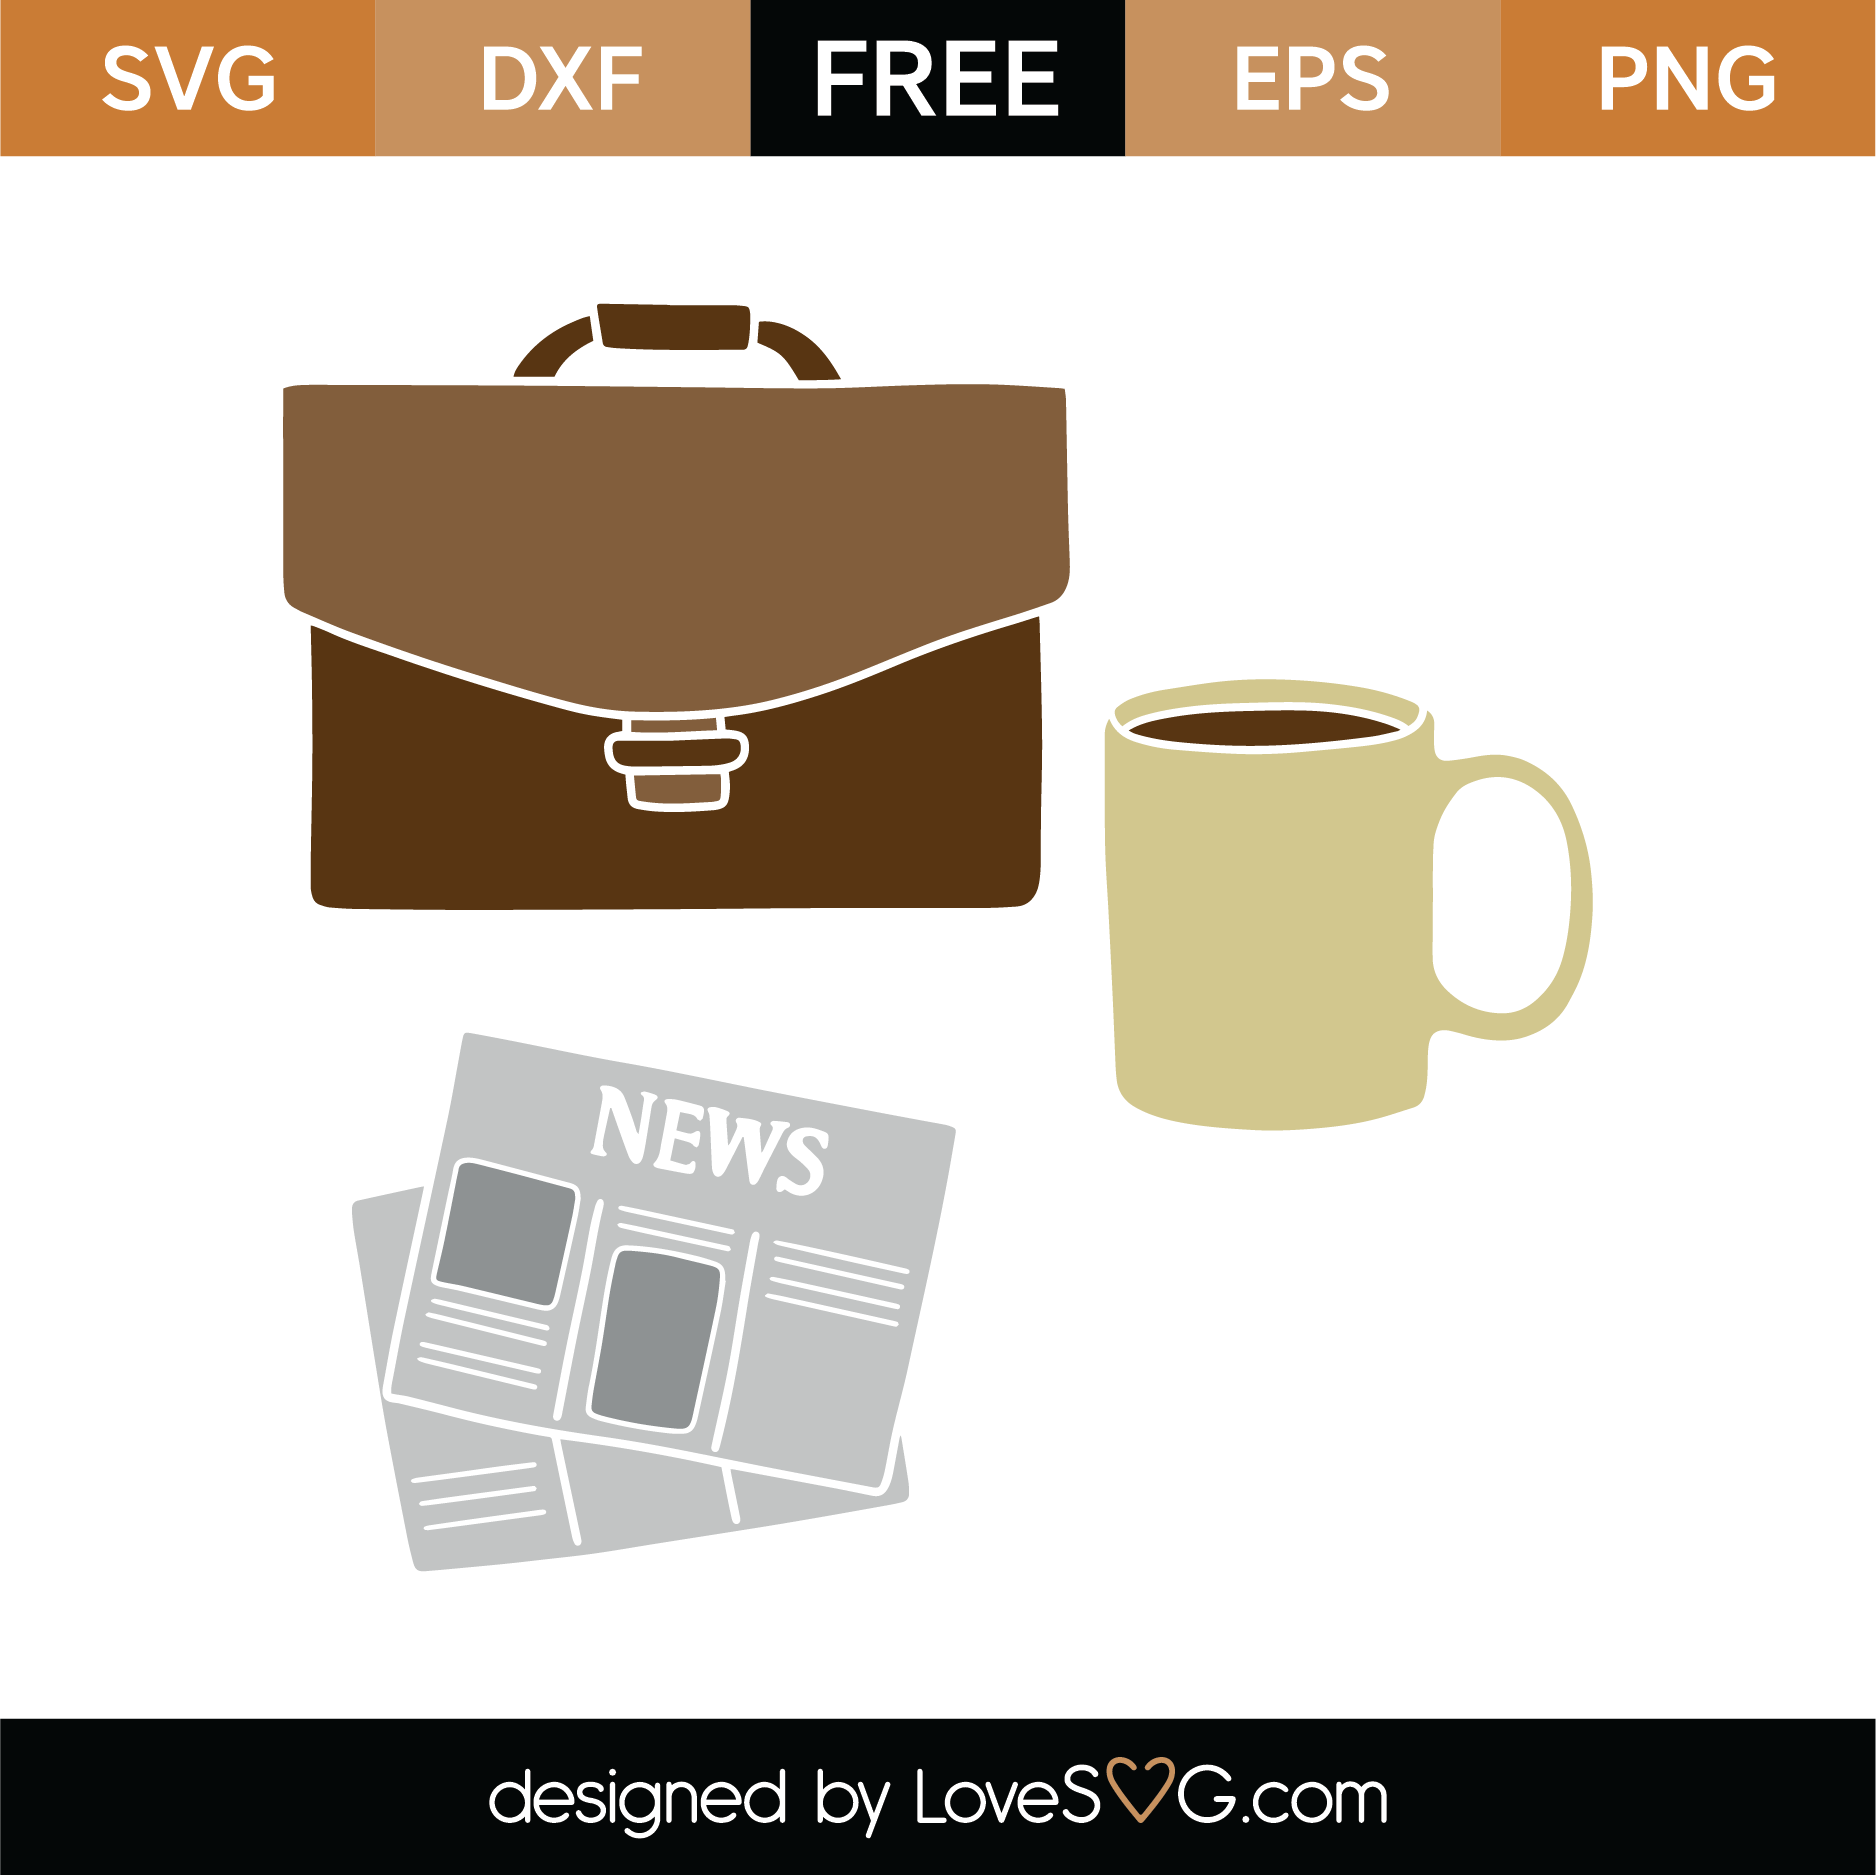 The Office Free SVG Files